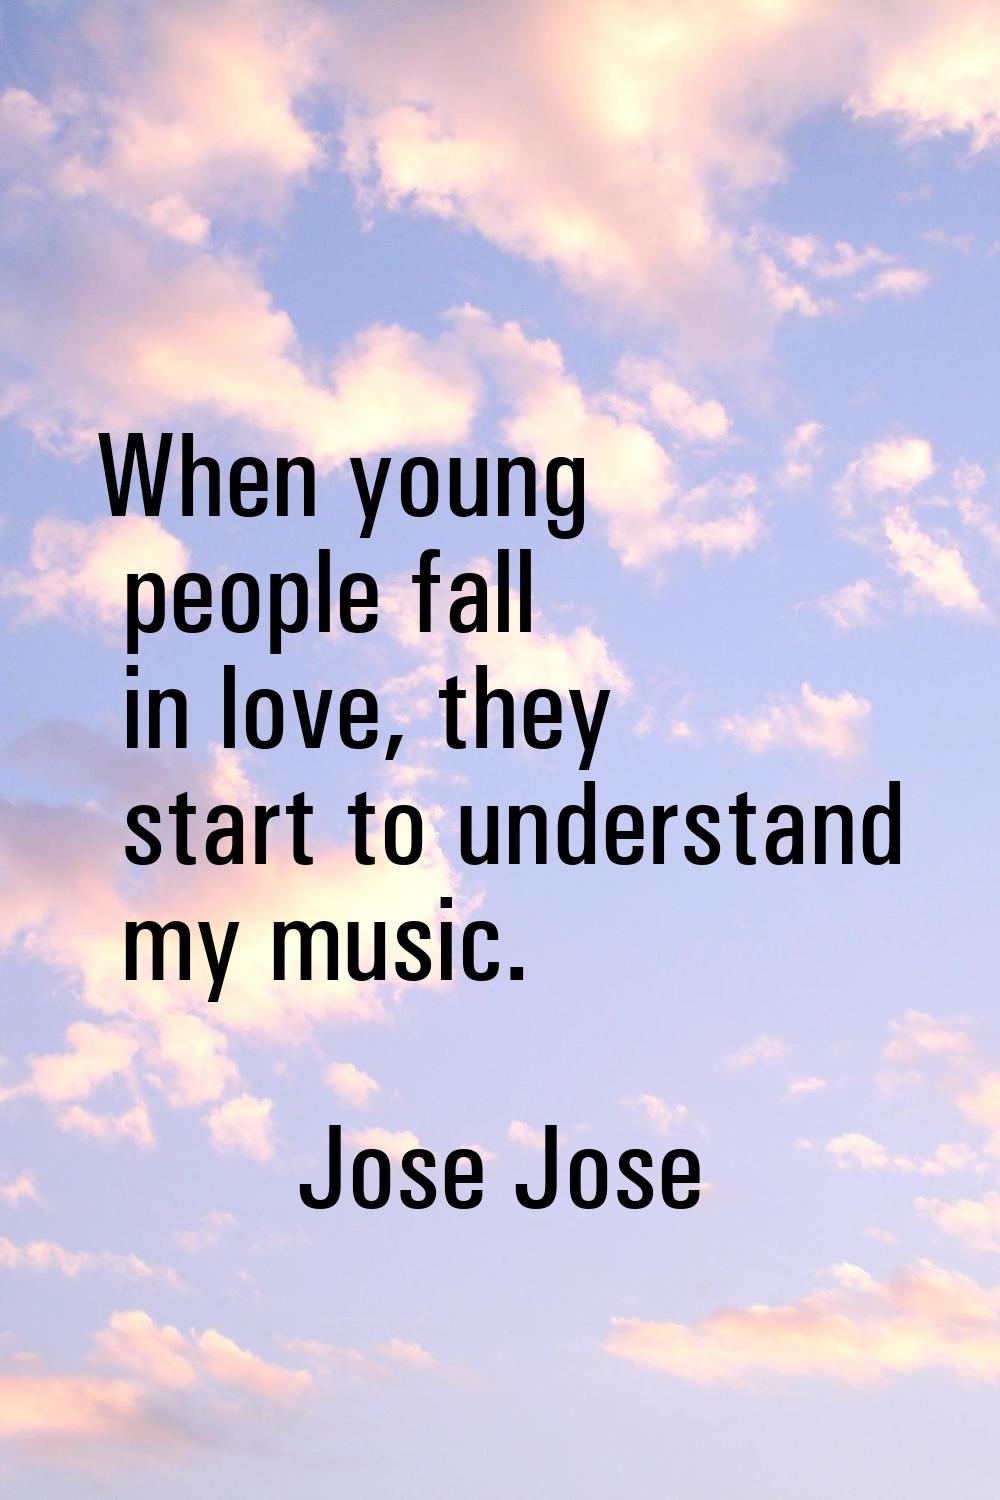 When young people fall in love, they start to understand my music.